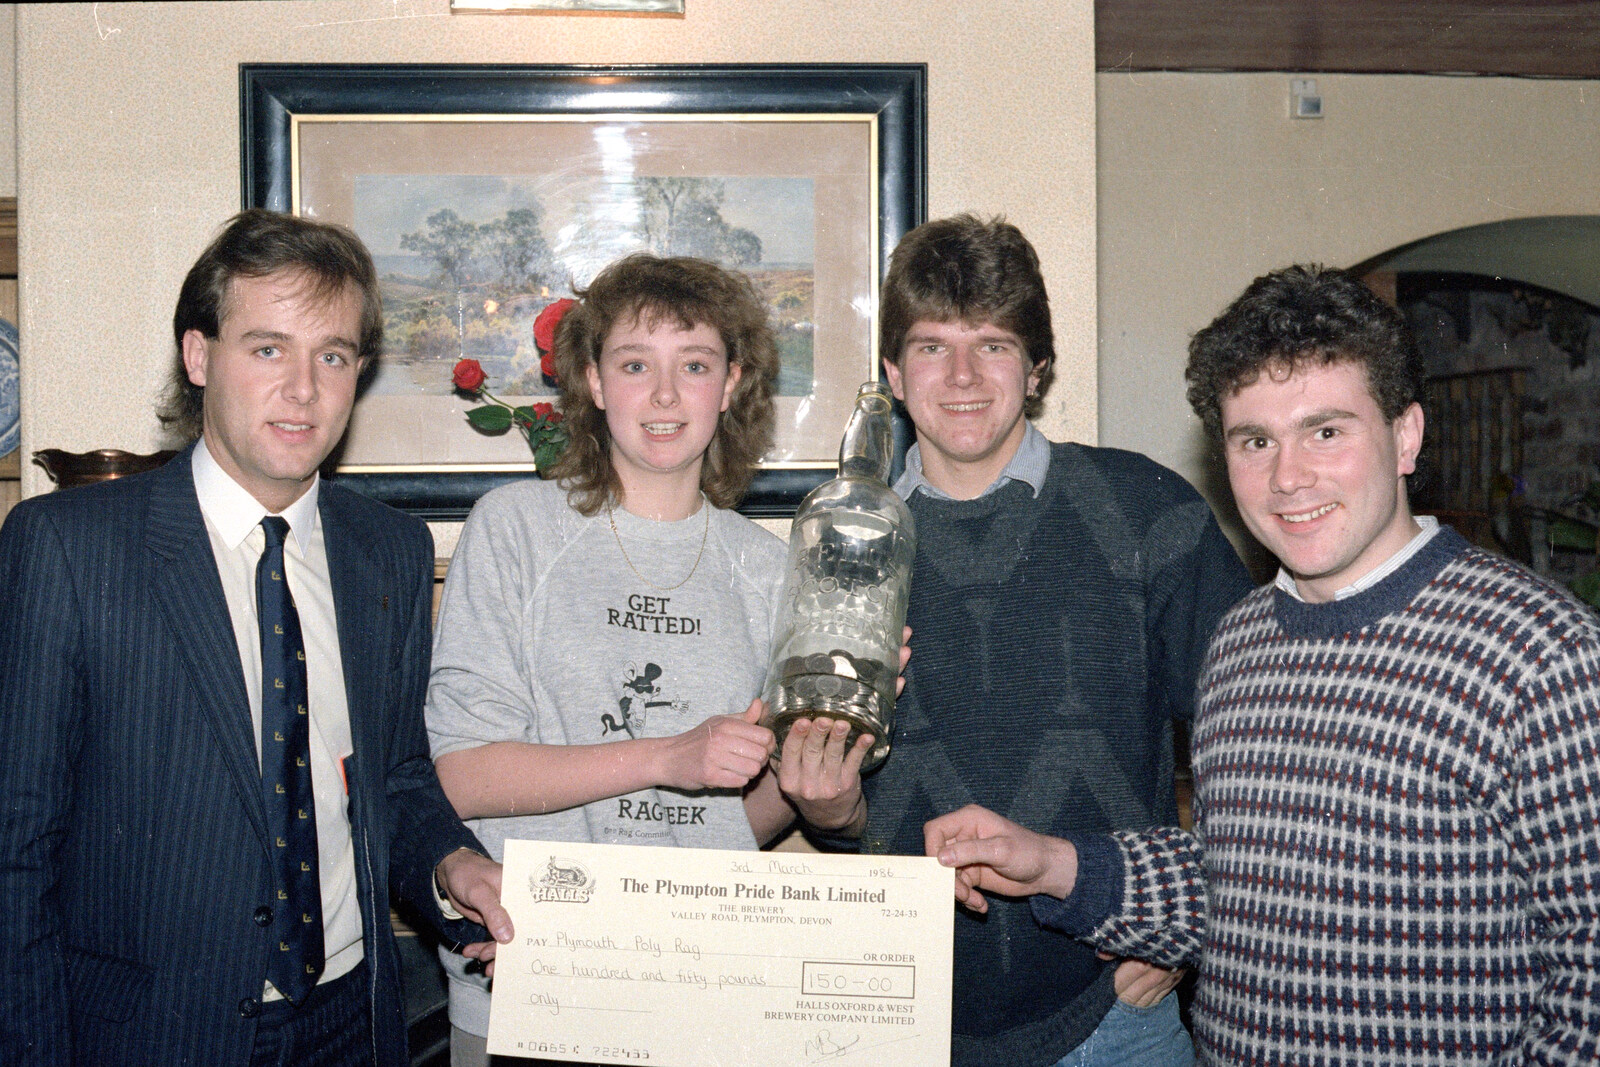 Halls Oxford and West presents a £150 cheque from Uni: RAG Week Abseil, Hitch Hike, and Beaumont Street Life Plymouth, Devon - 13th February 1986